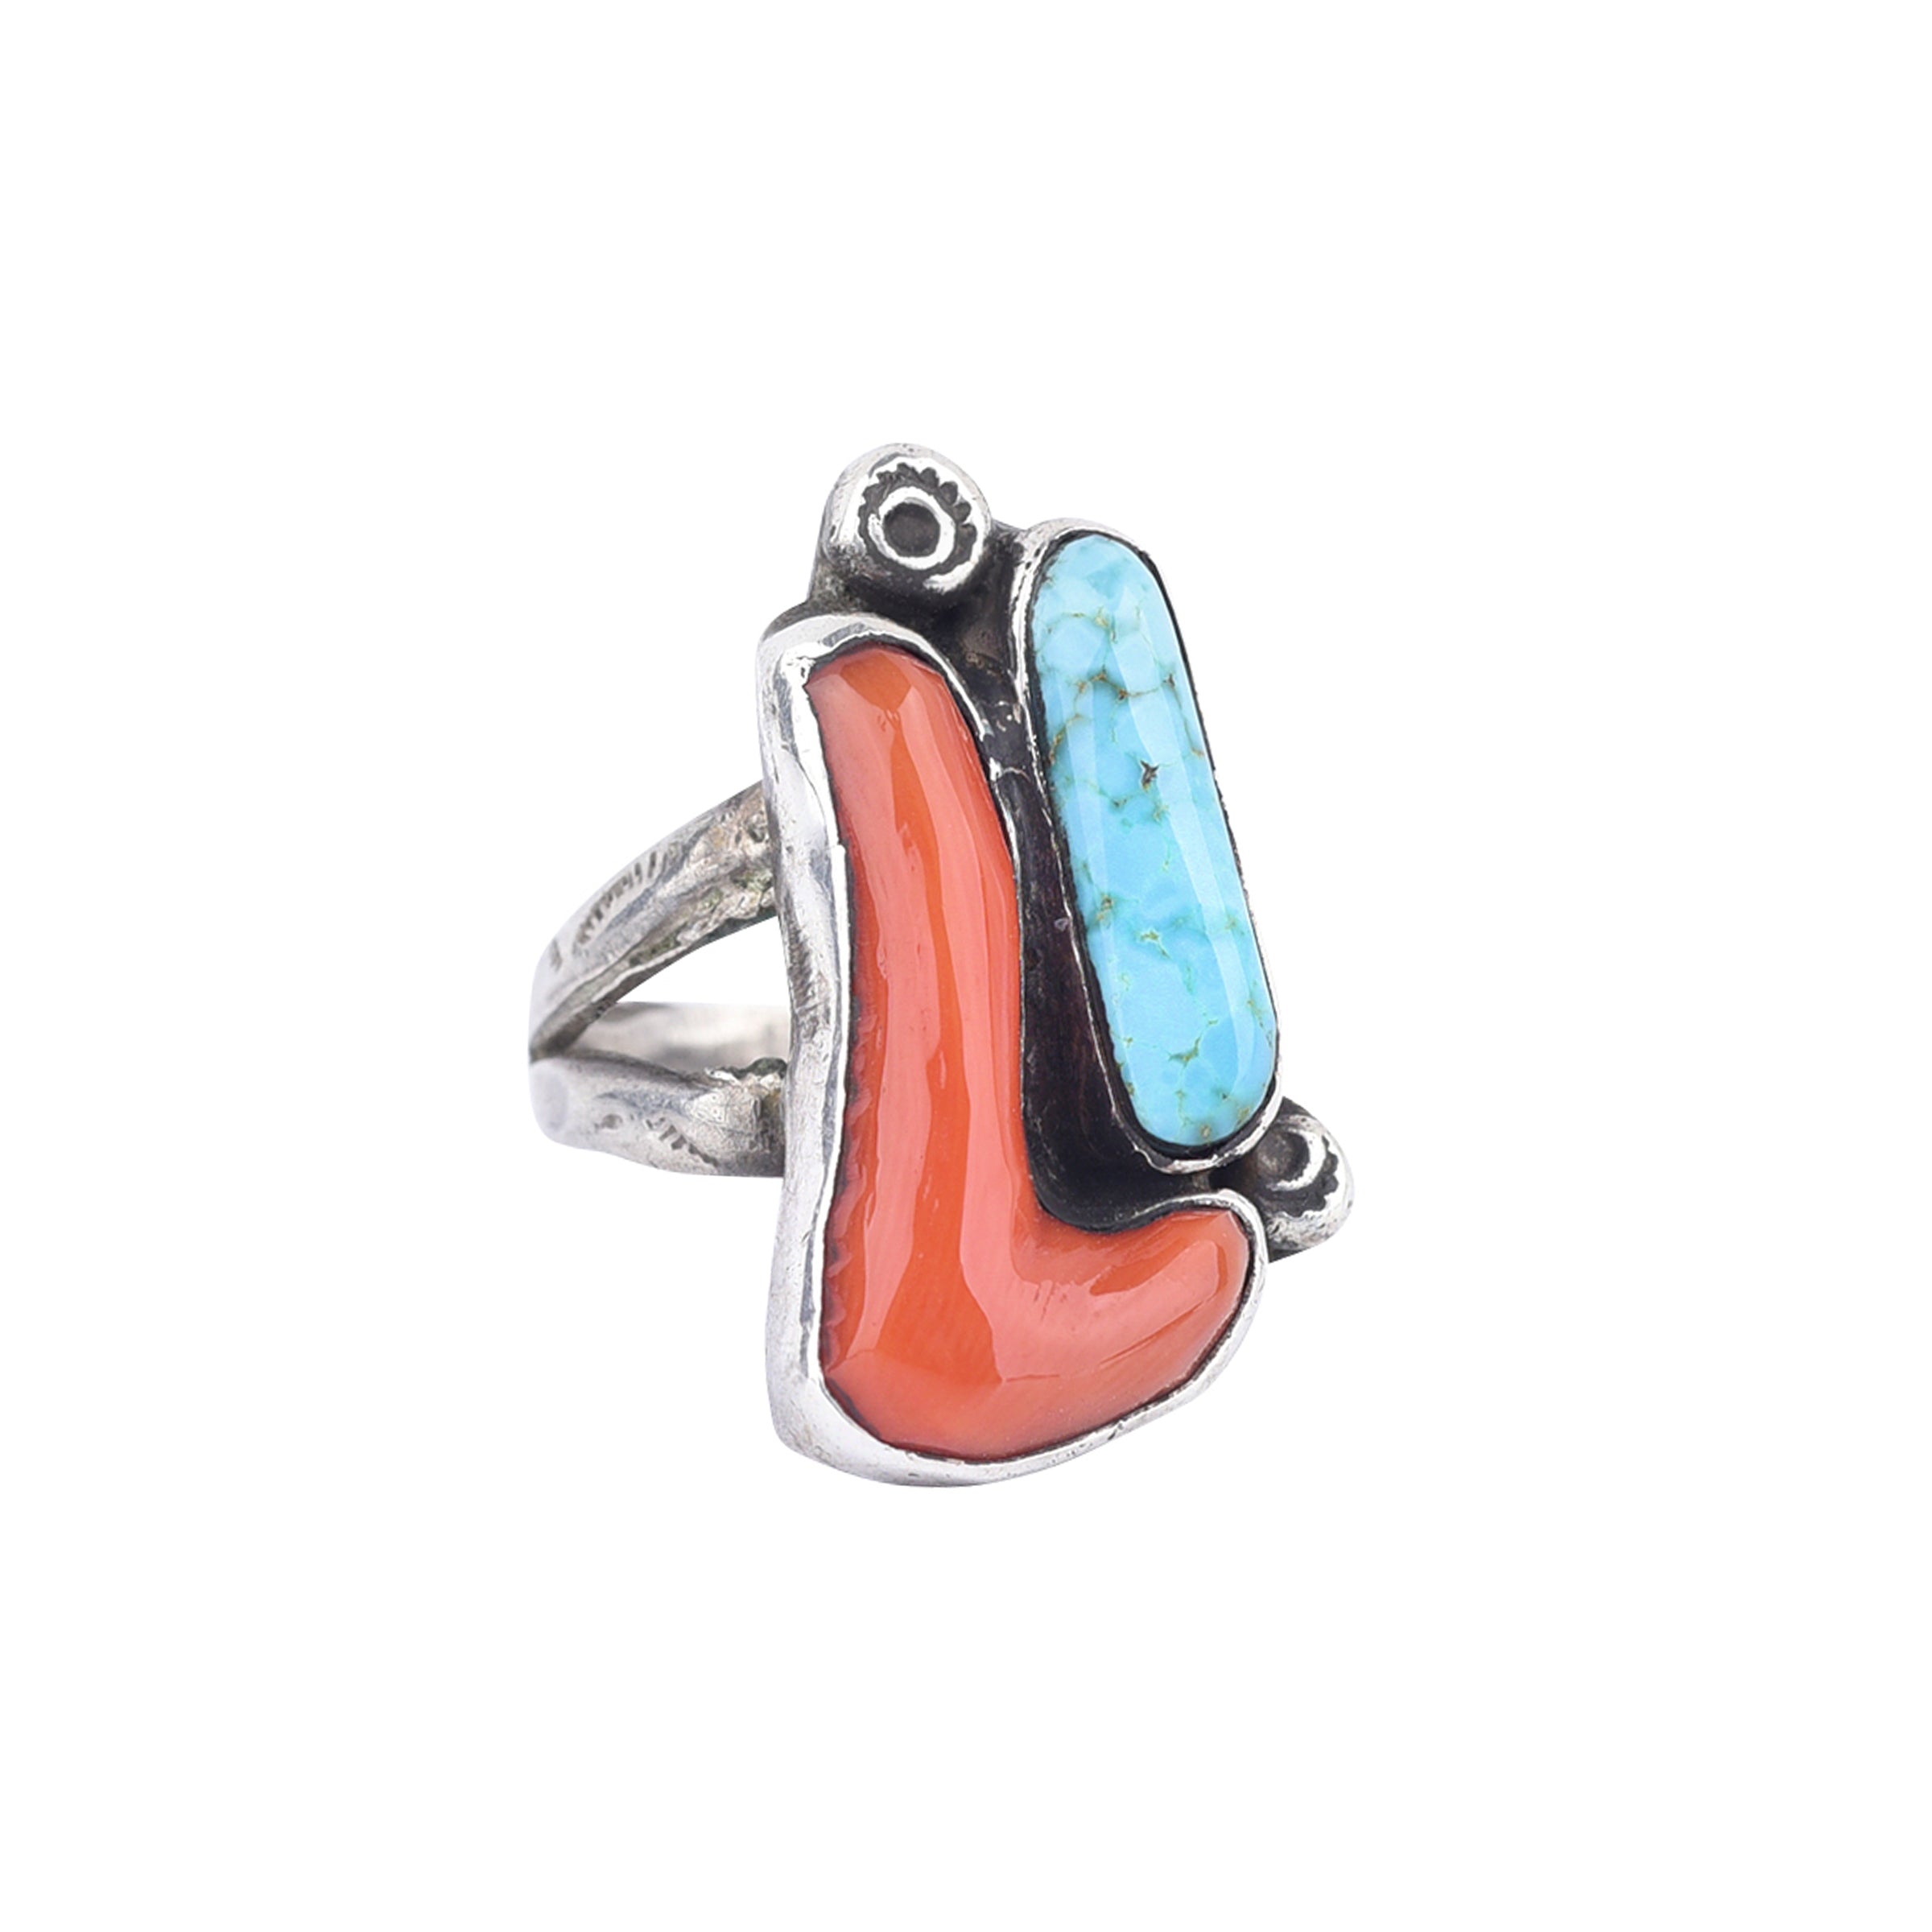 Vintage Coral And Turquoise Mix Ring - Size 6 3/4